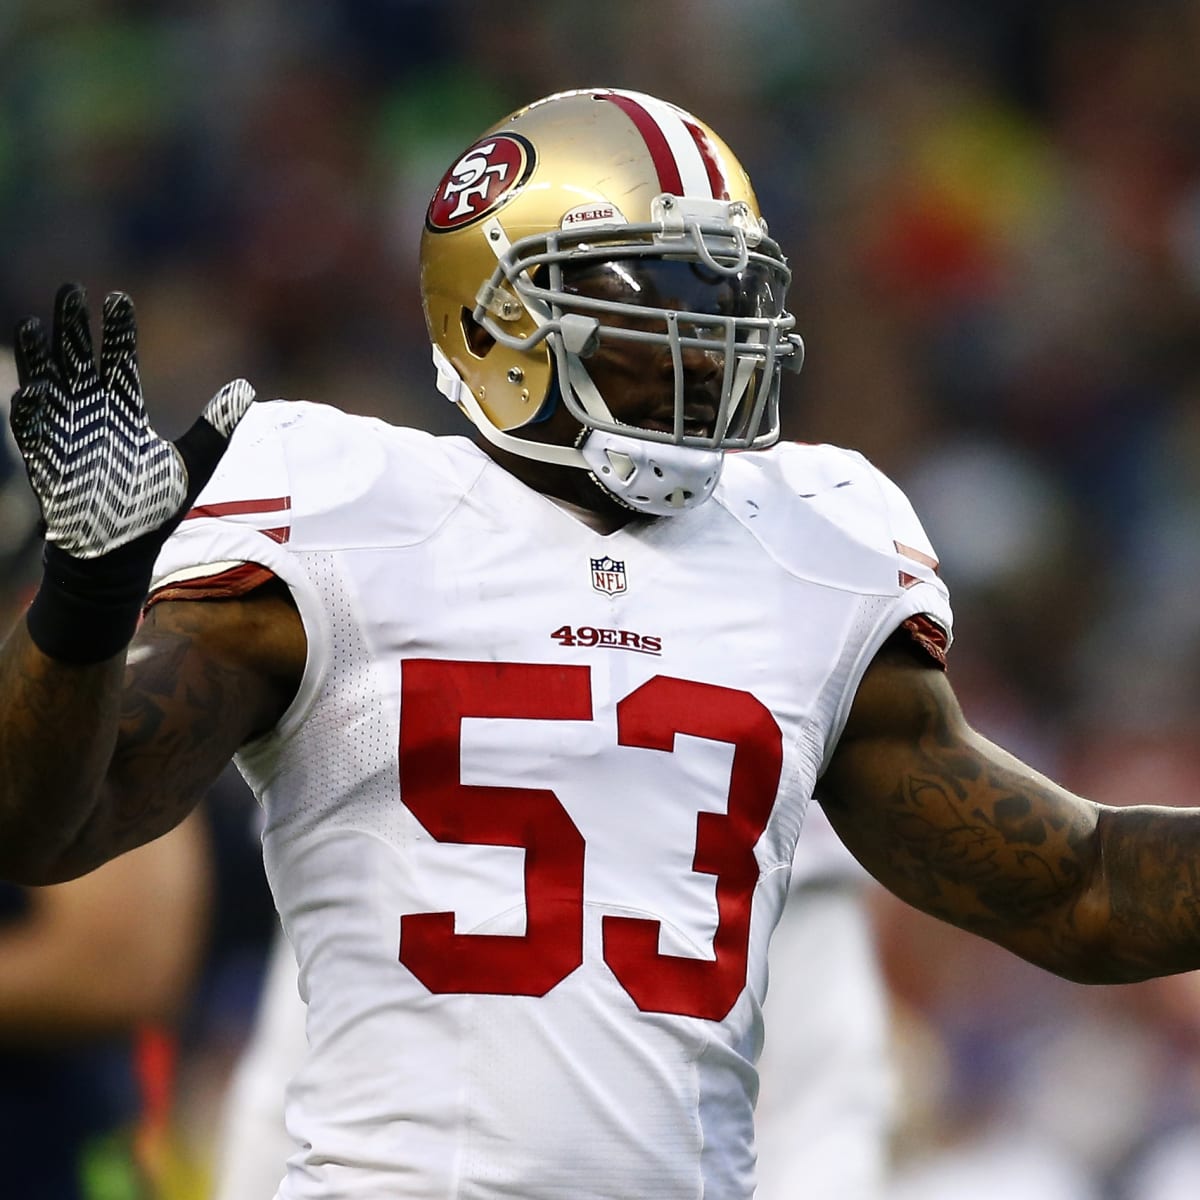 NaVorro Bowman has started running in ACL rehab - NBC Sports